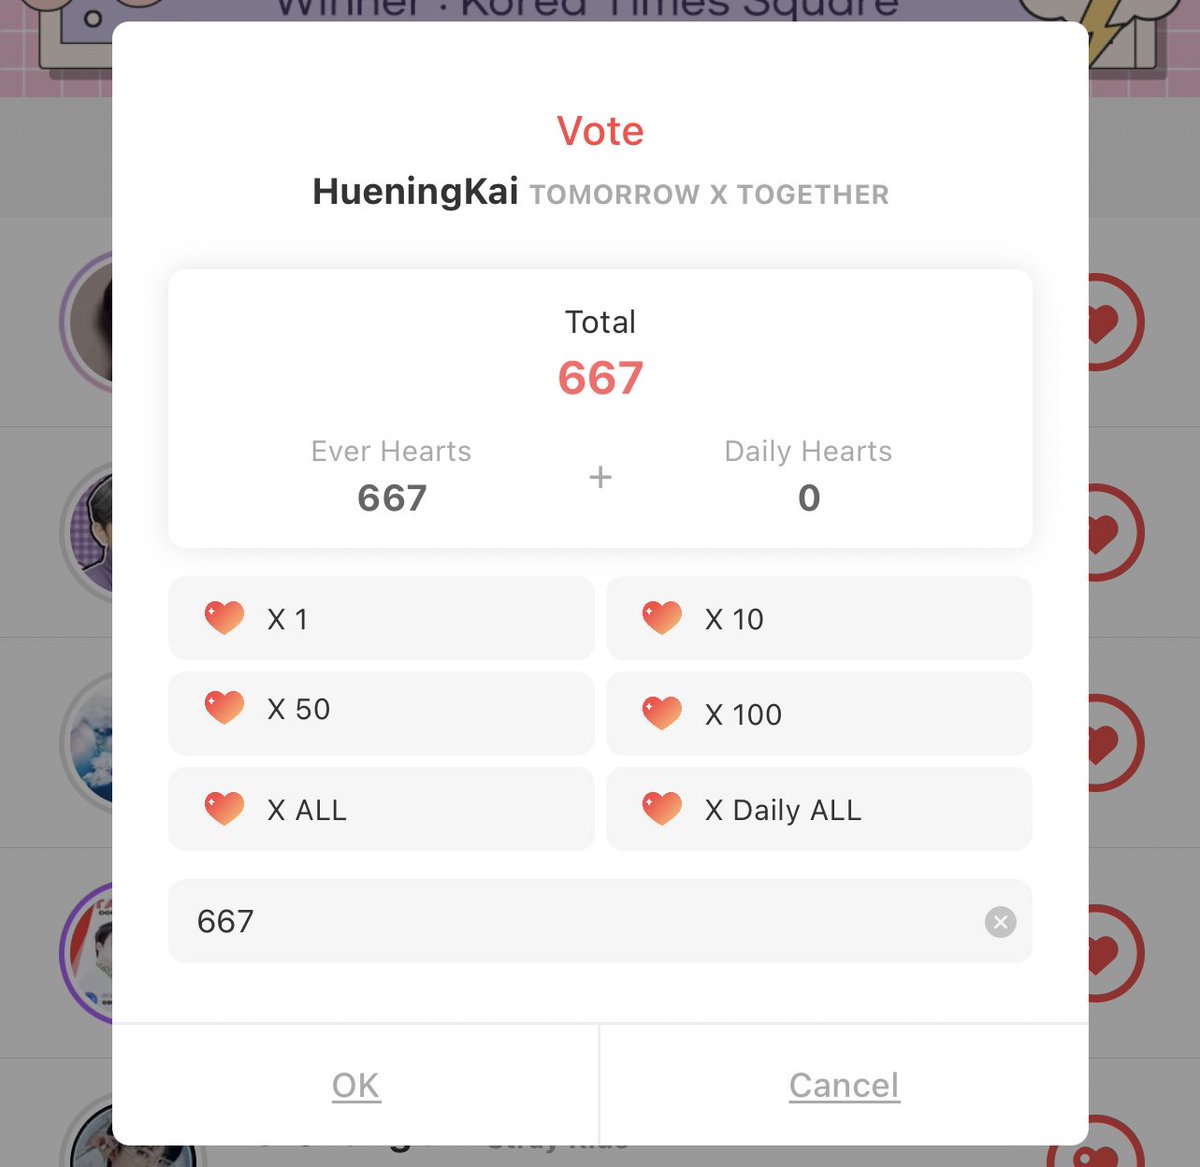 🗳️ BIRTHDAY POLL CHOEAEDOL

MOA THIS POLL WILL END ON JUNE 30TH PLEASE MAKE SURE TO VOTE! 📢 HueningKai is currently third place 🚨🚨